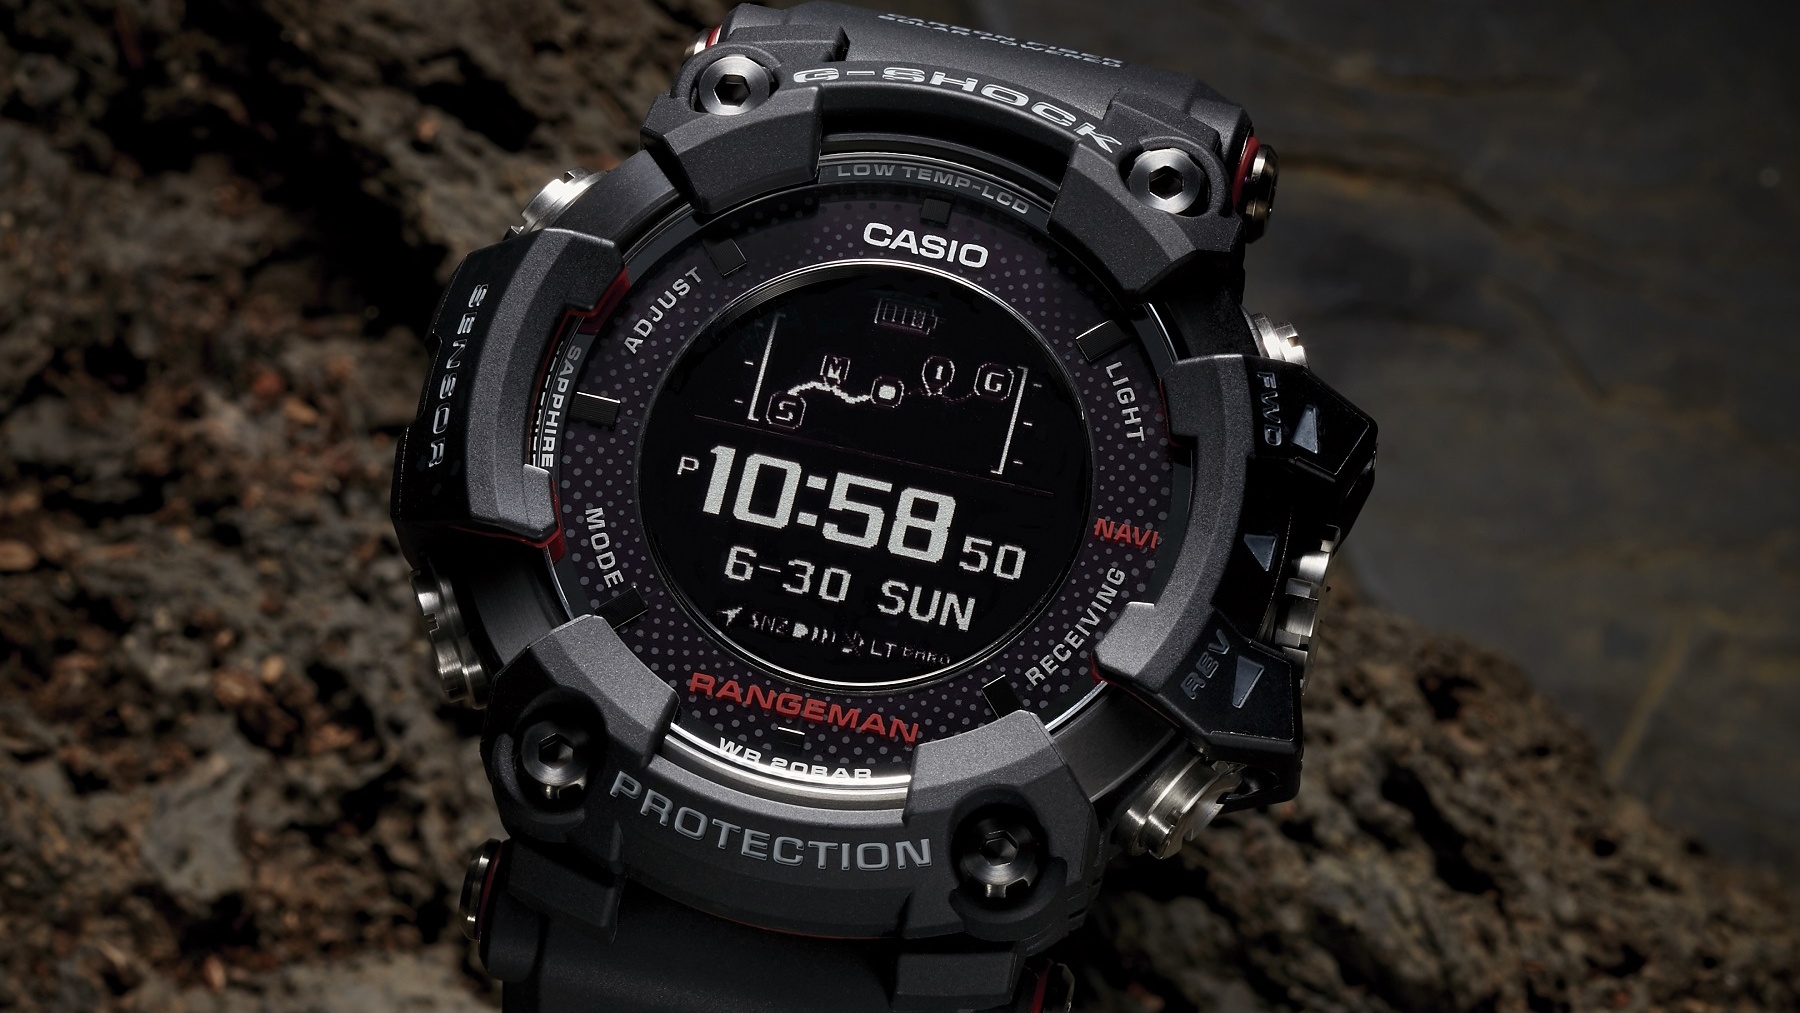 Skraldespand enke kasseapparat Casio unveils an explorer's smartwatch with GPS that you can recharge with  the sun | TechRadar